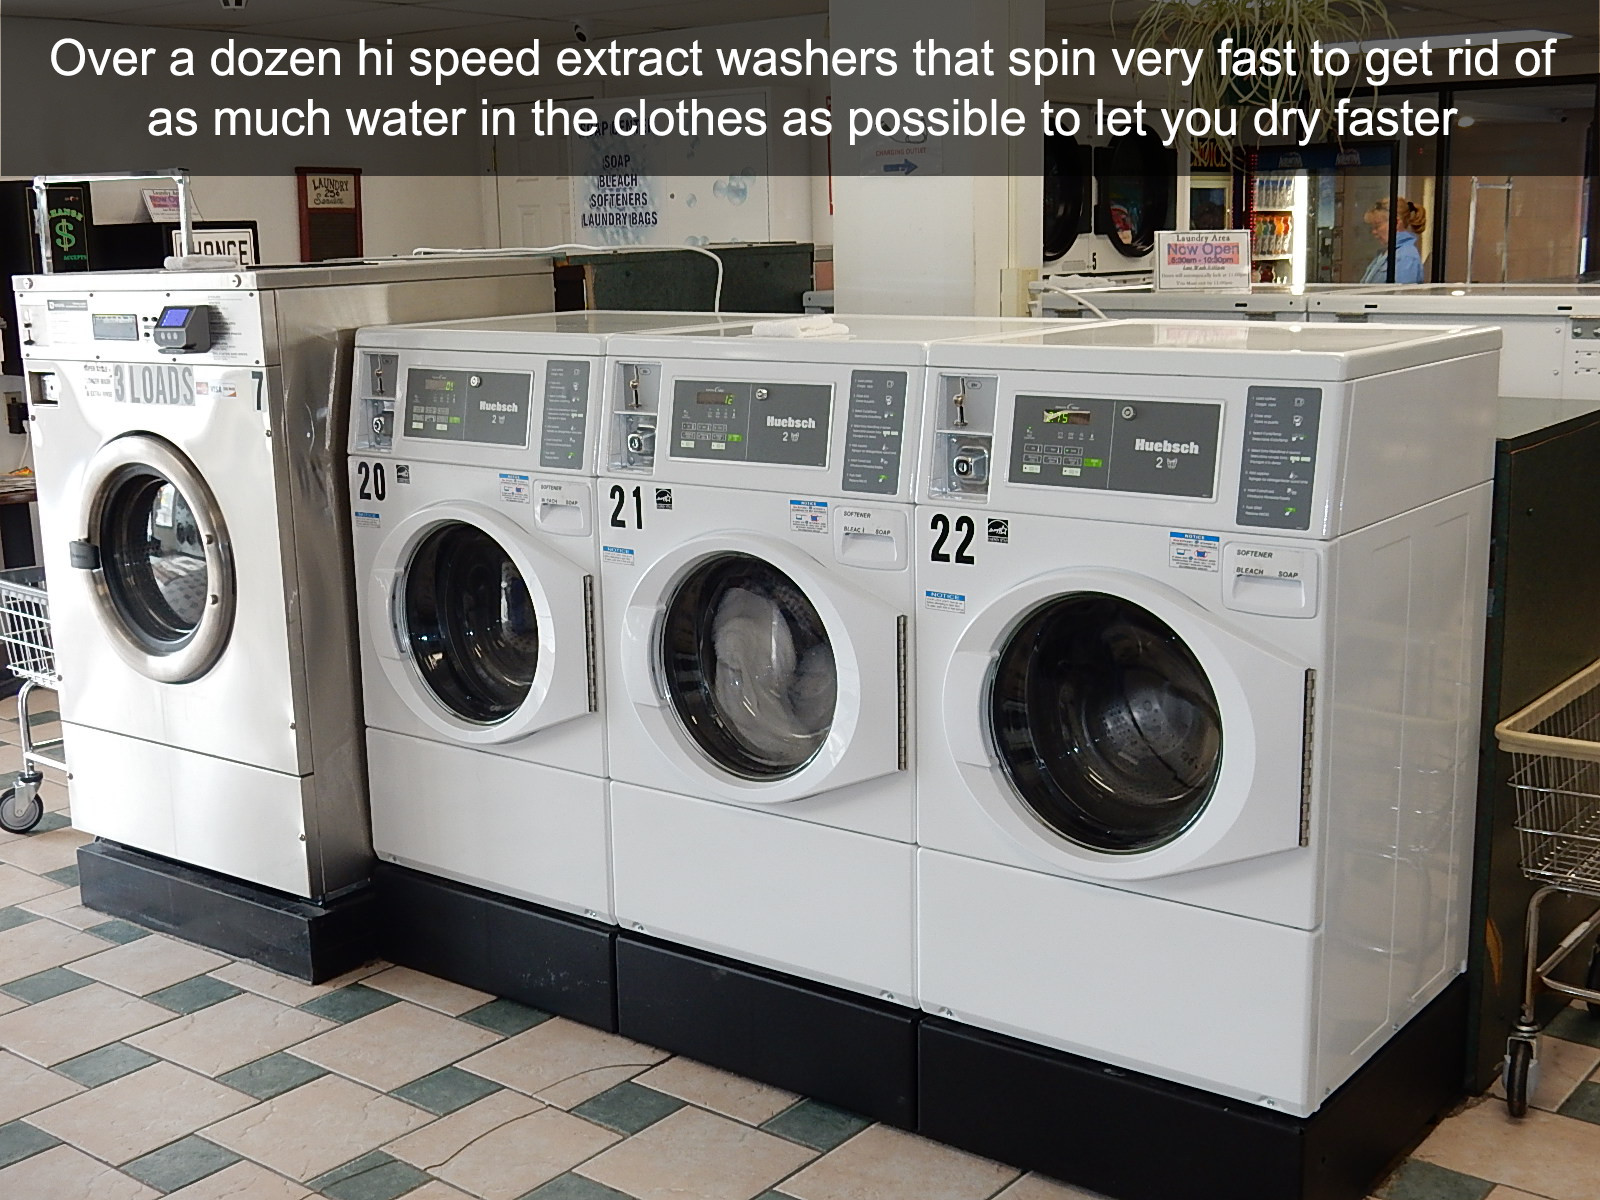 Over a dozen hi speed extract washers that spin very fast to get rid of as much water in the clothes as possible to let you dry faster